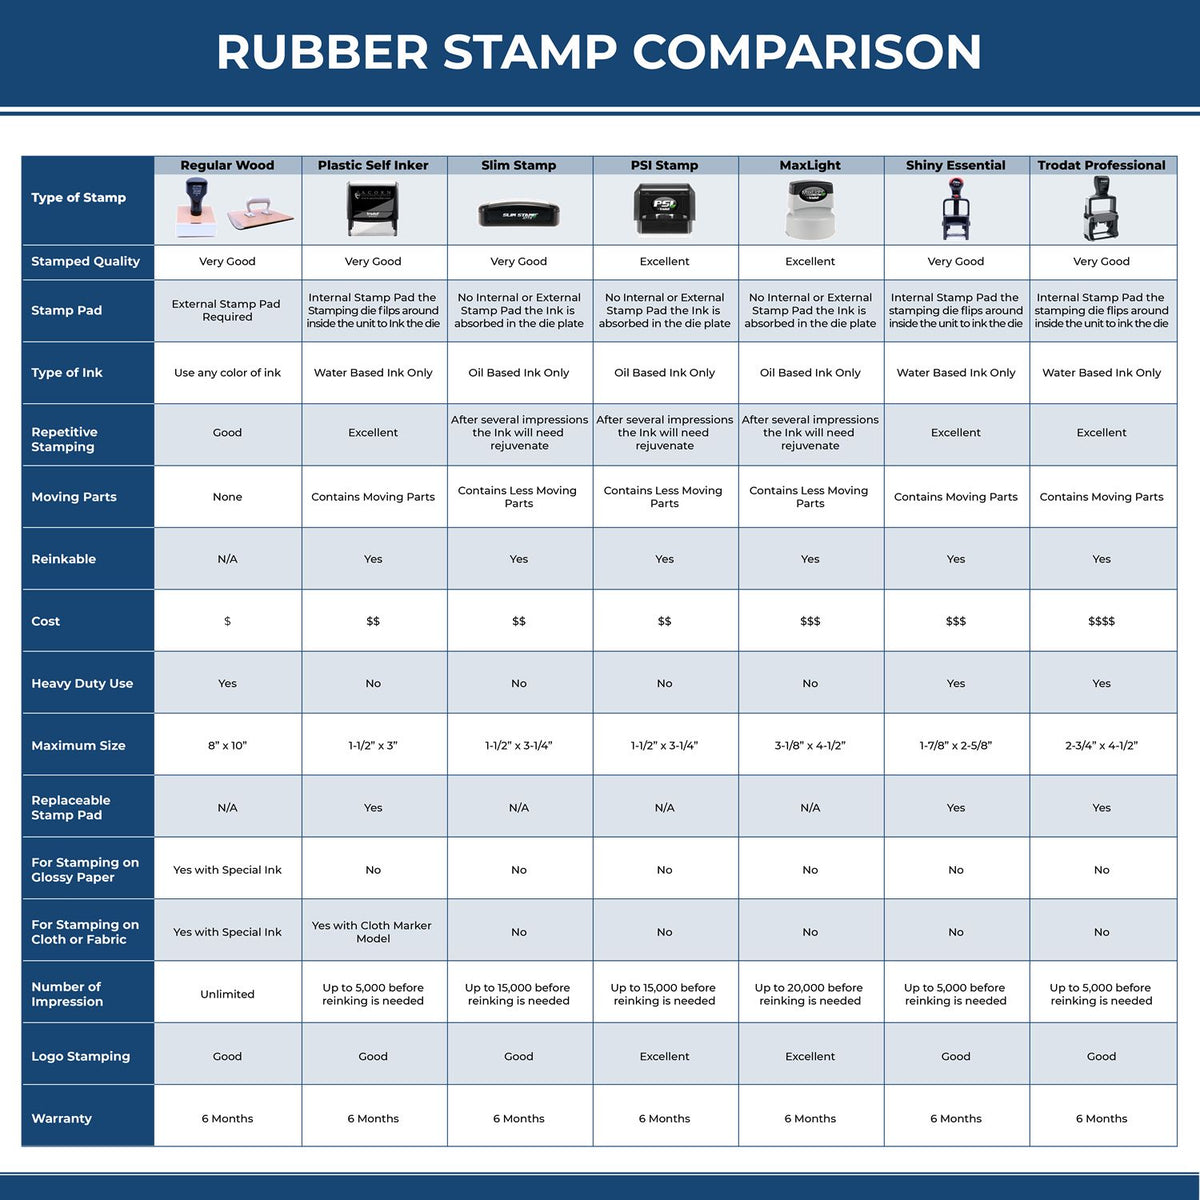 Large Self Inking Application Complete Stamp 4551S Rubber Stamp Comparison